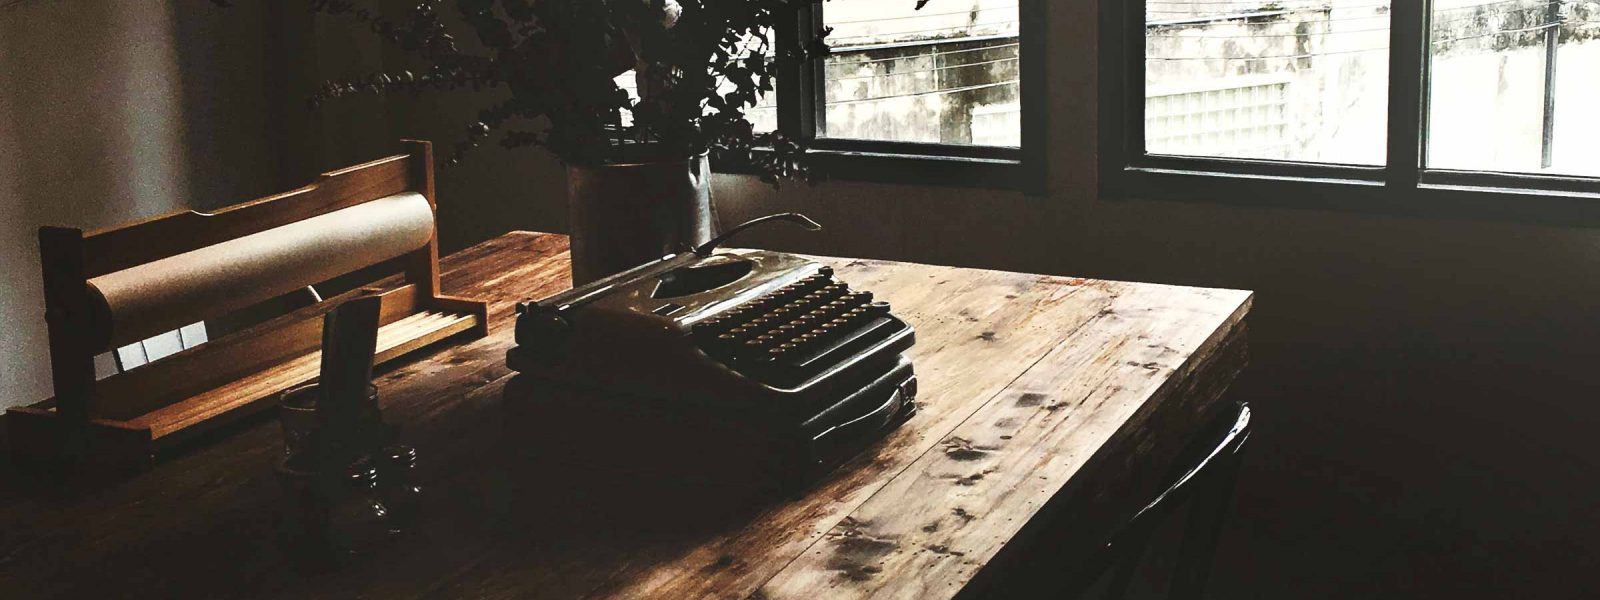 A typewriter sits on a table in the sunlight